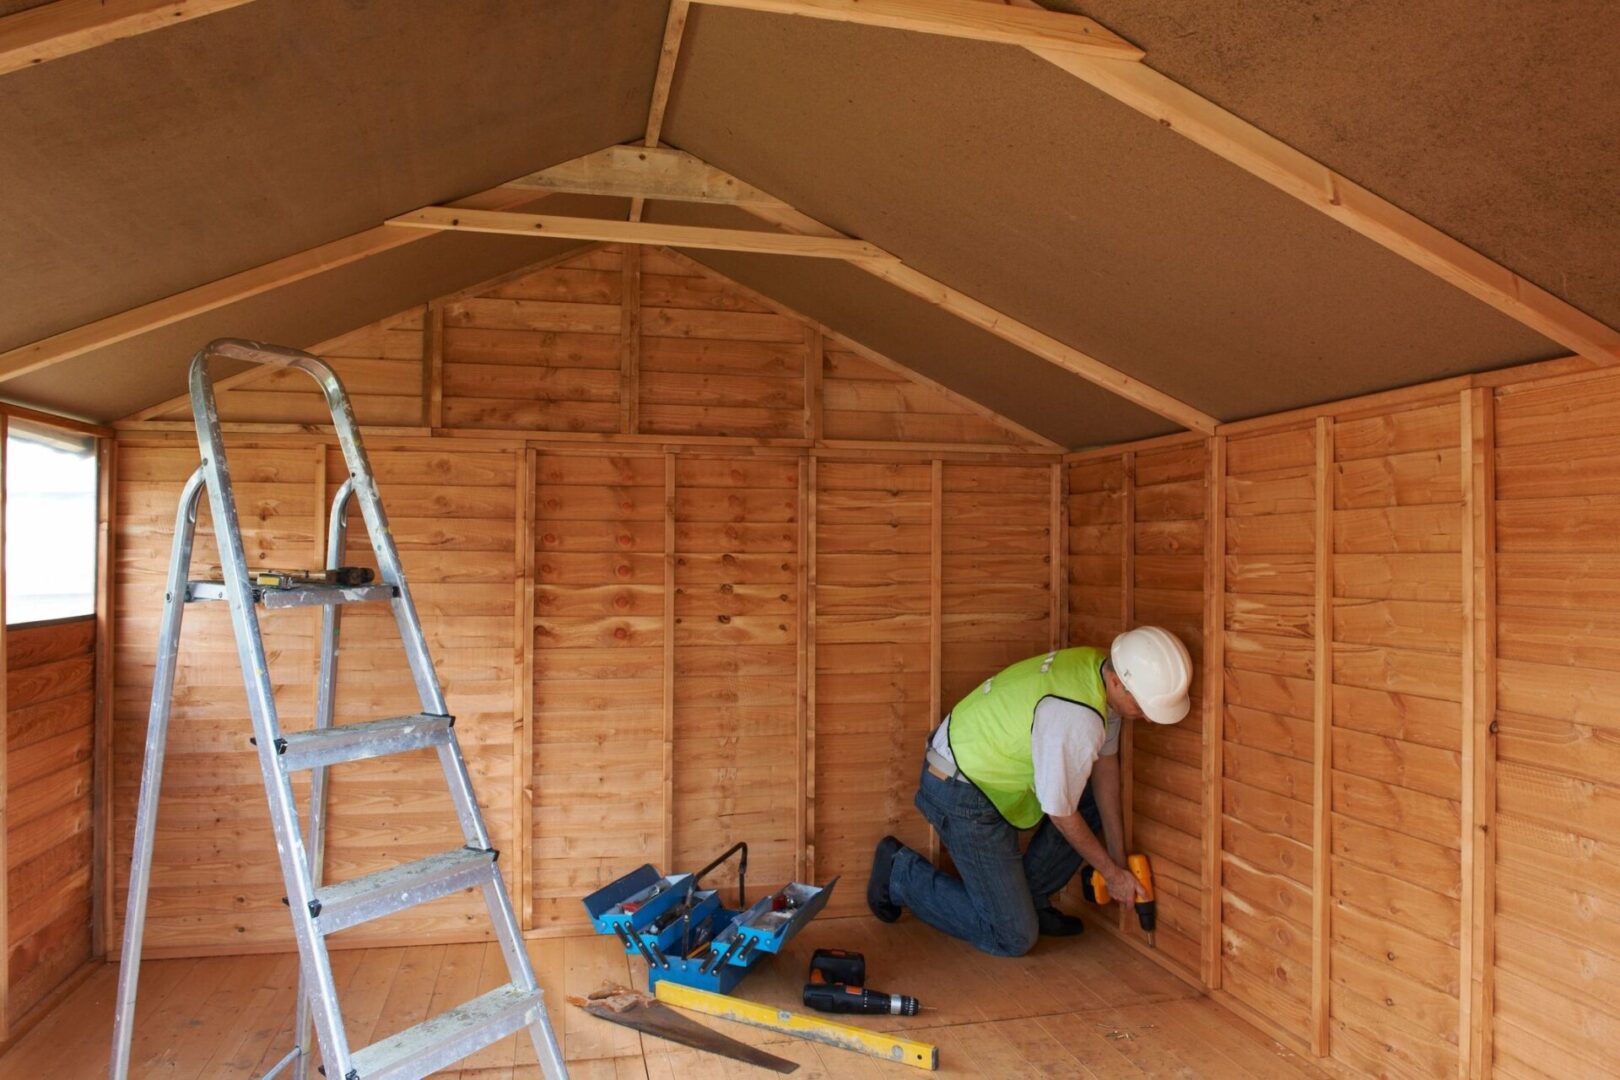 An expert in architectural design services is meticulously working on the inside of a wooden shed.